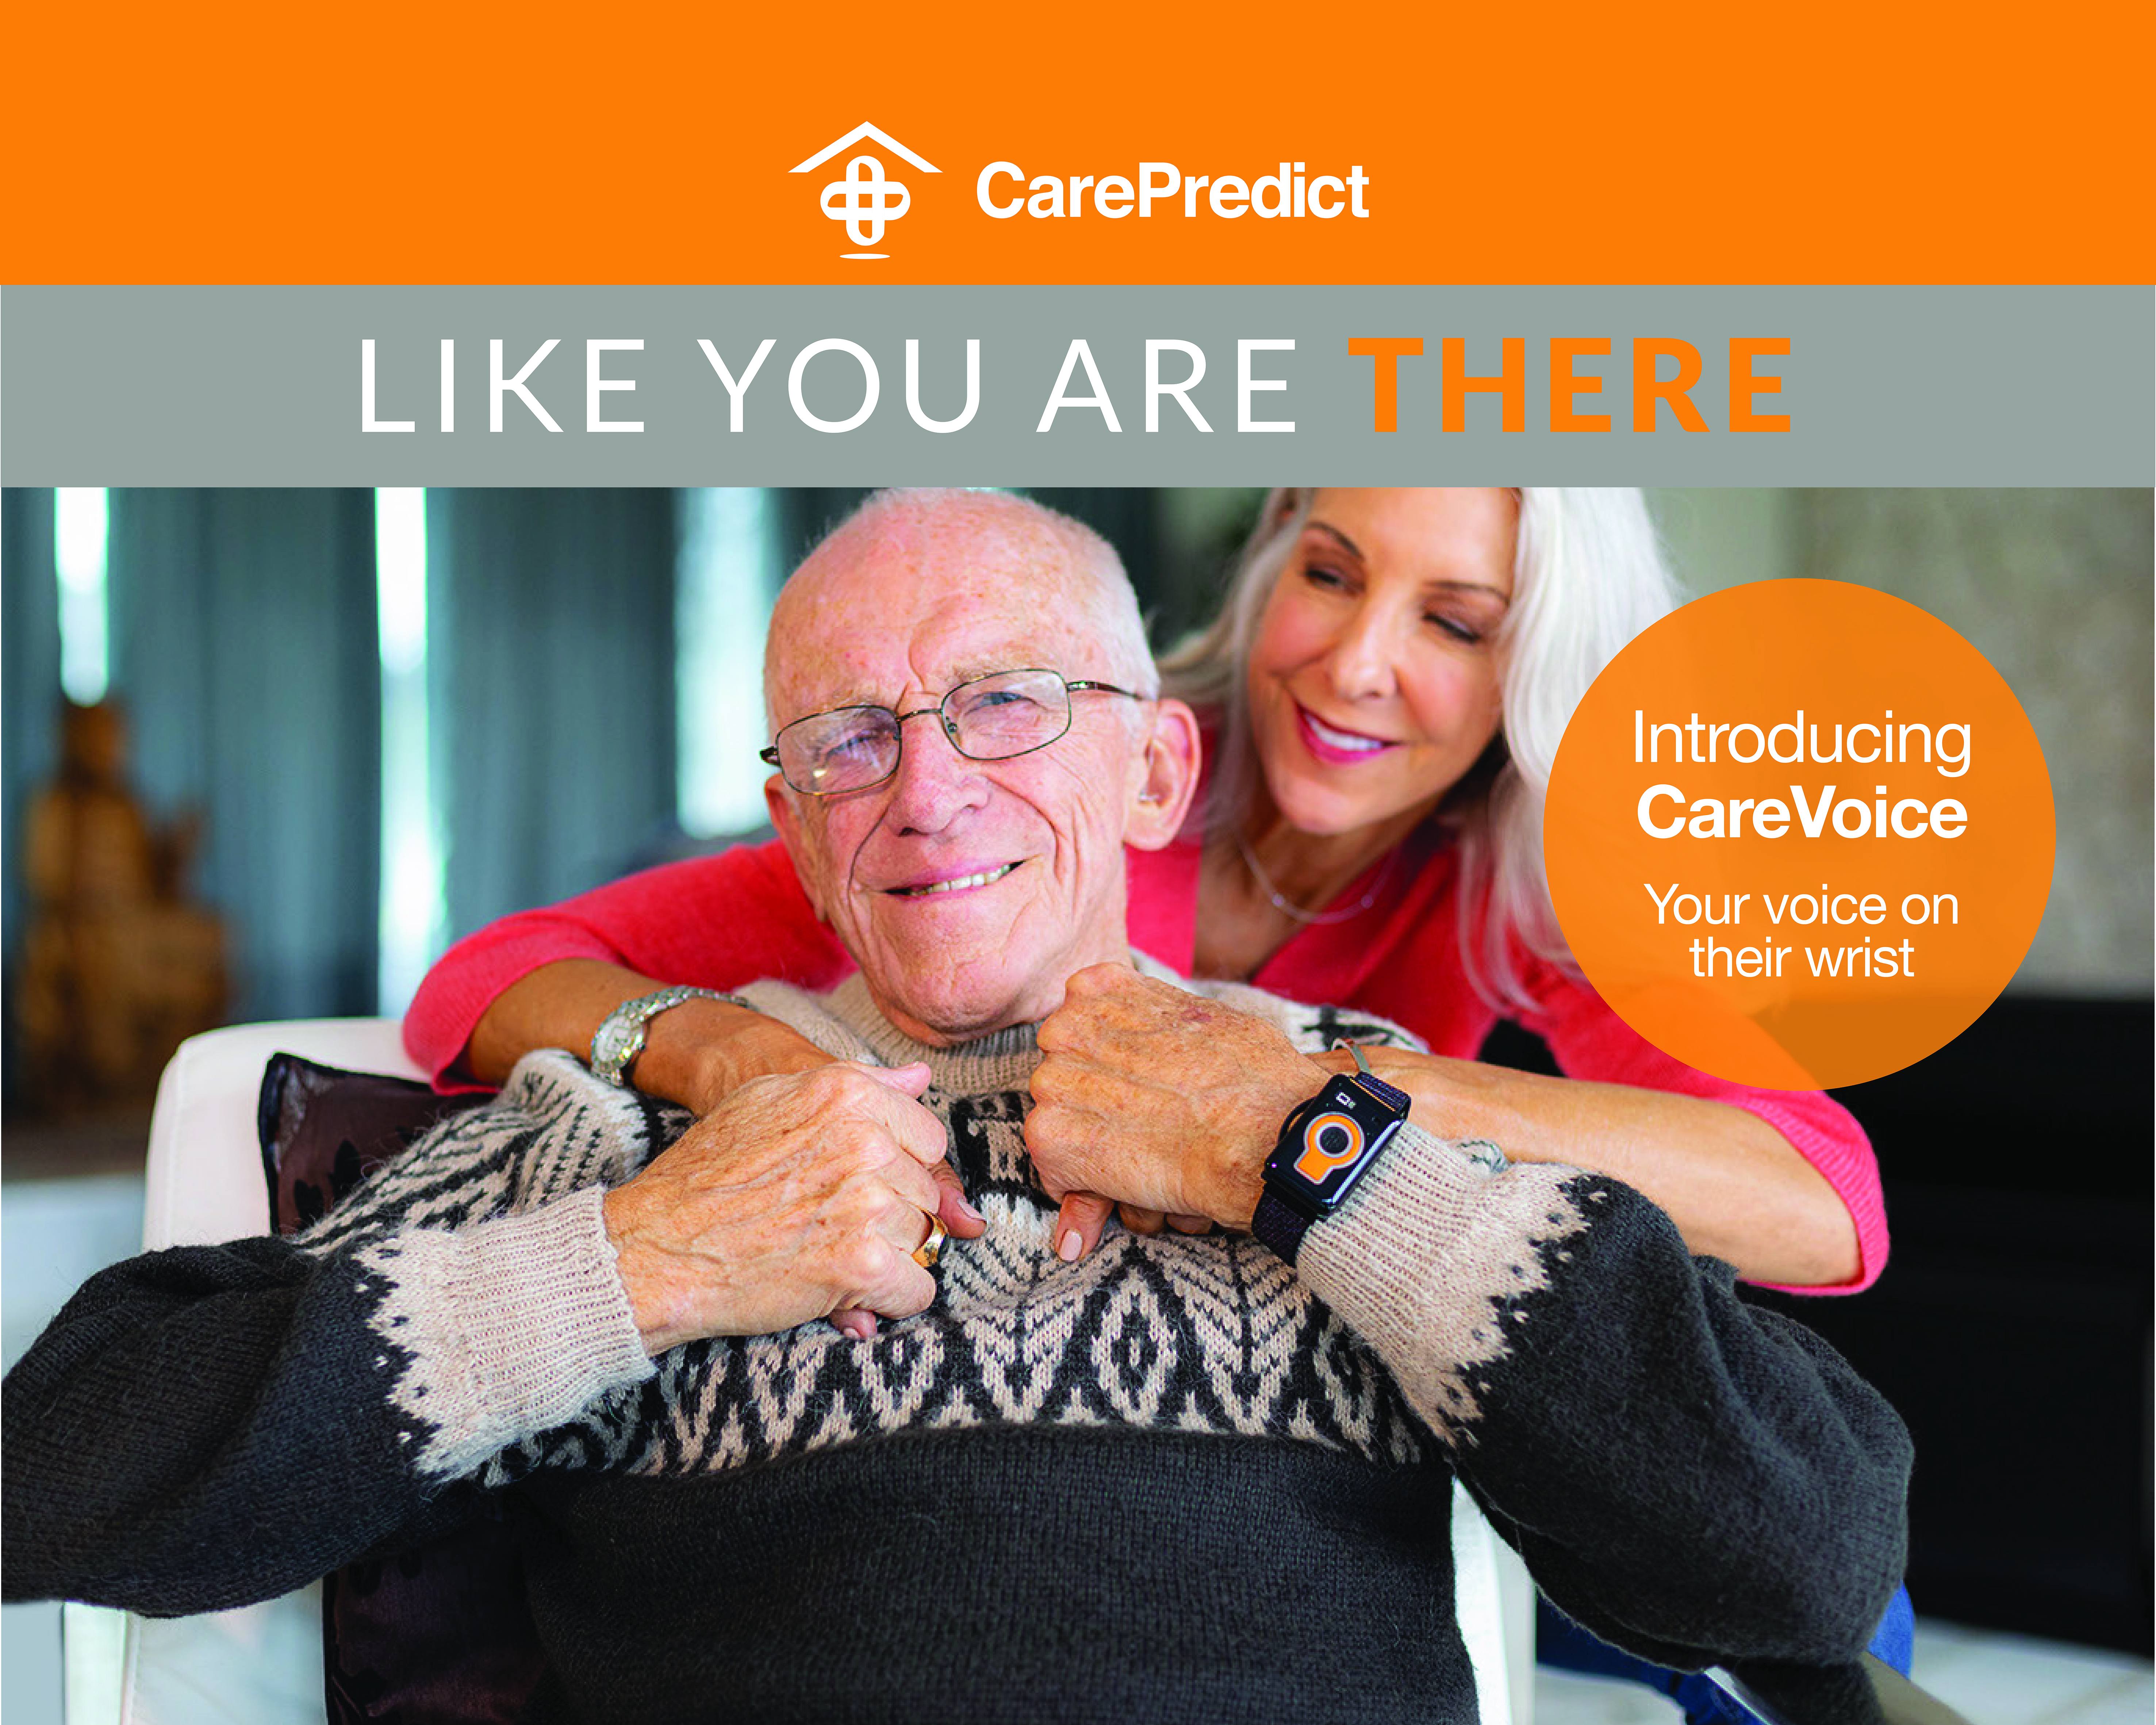 CareVoice - Your Voice on their Wrist